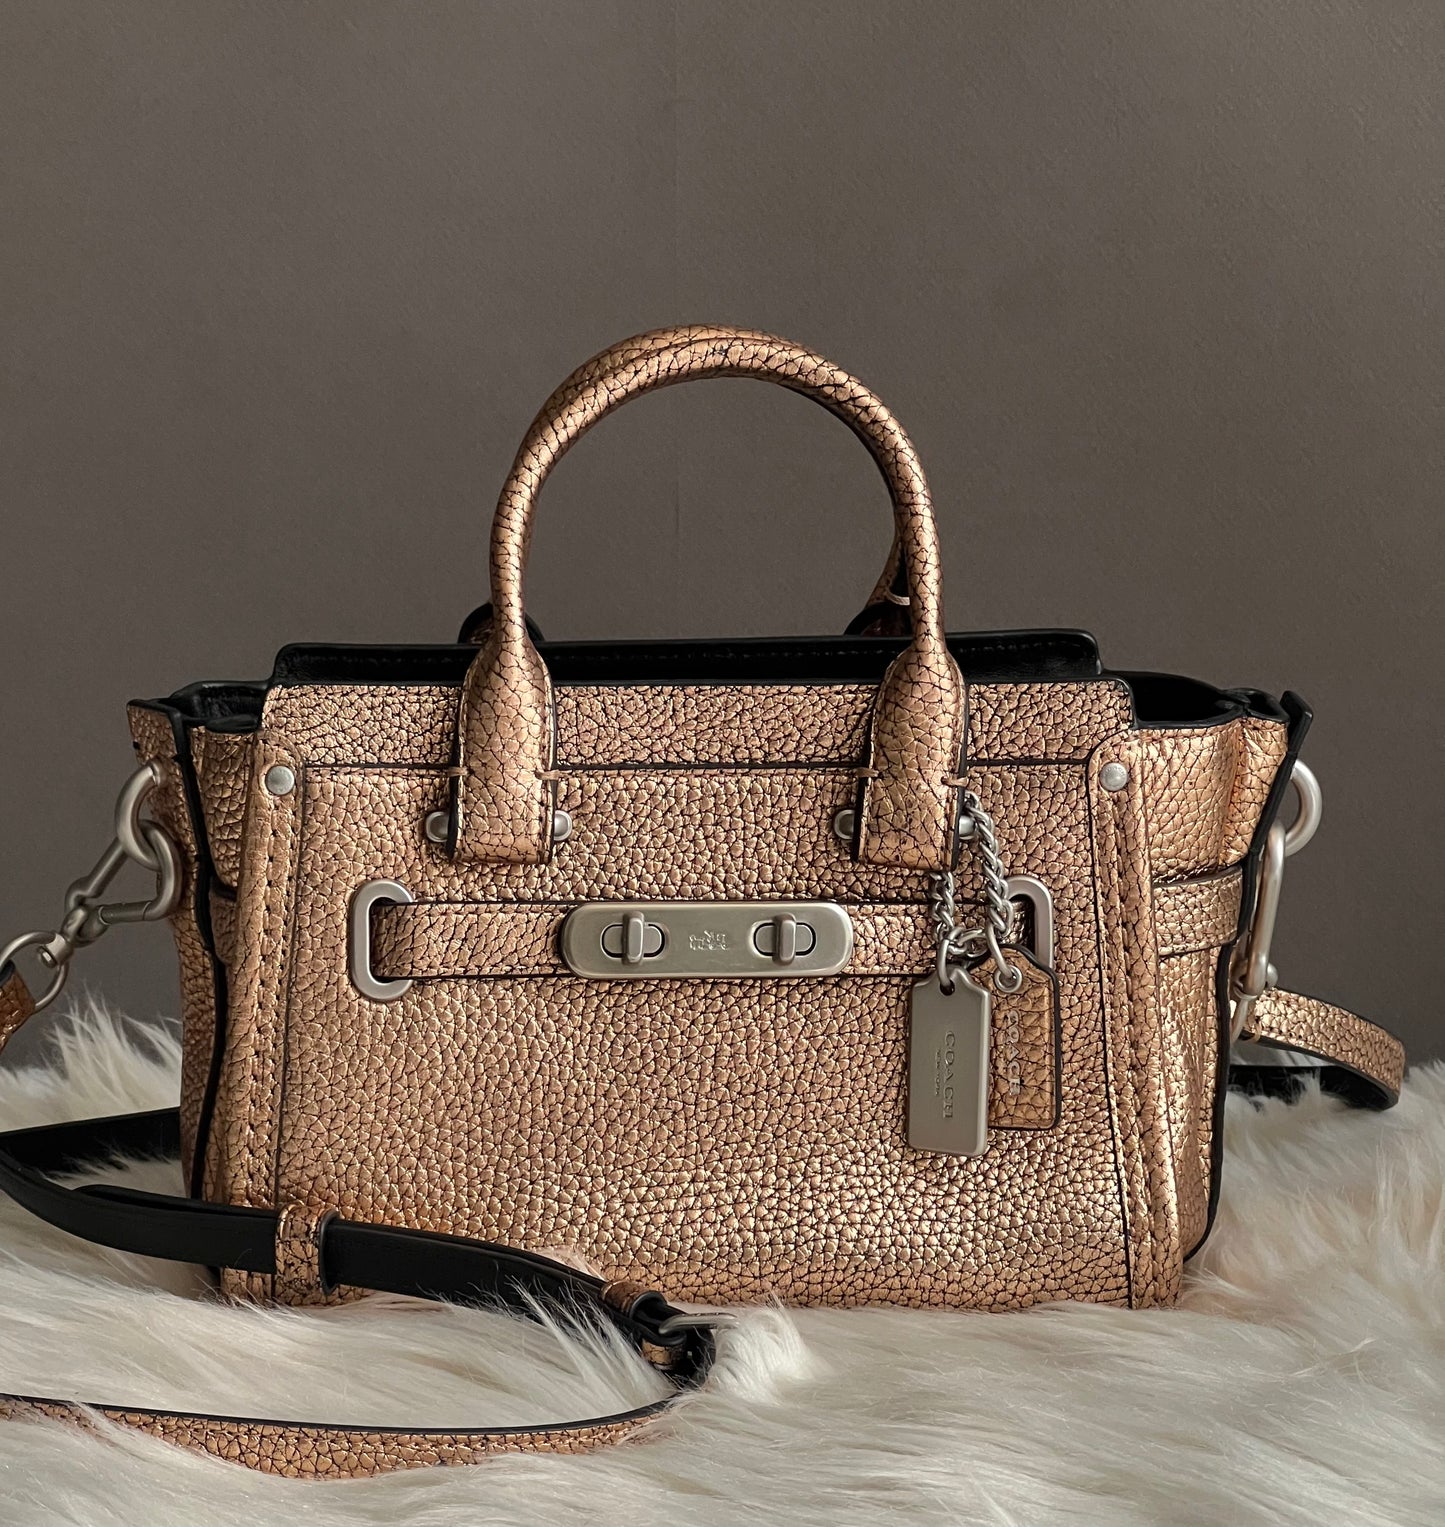 Coach Swagger 20 in Pebble Leather